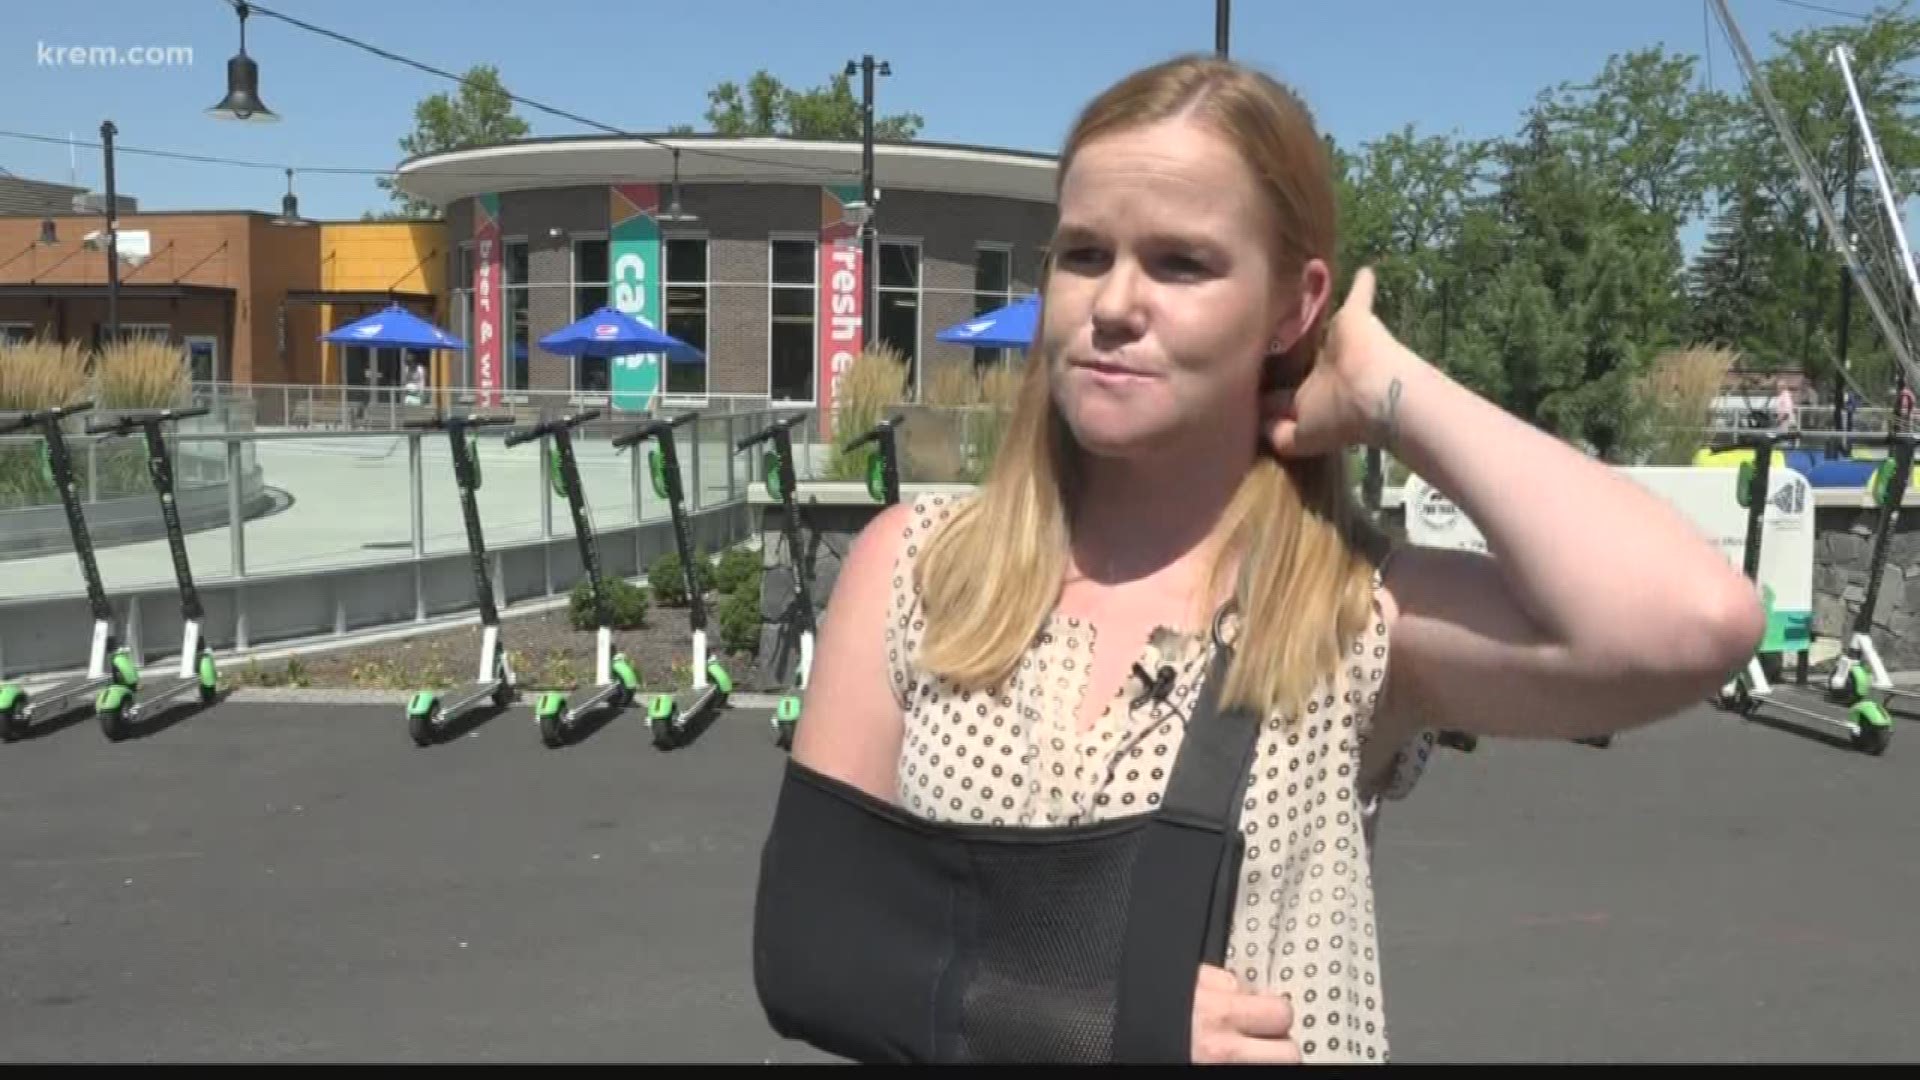 KREM's Amanda Roley spoke with a Spokane woman who claims a Lime scooter malfunction led to a crash in which she suffered a broken jaw and arm.